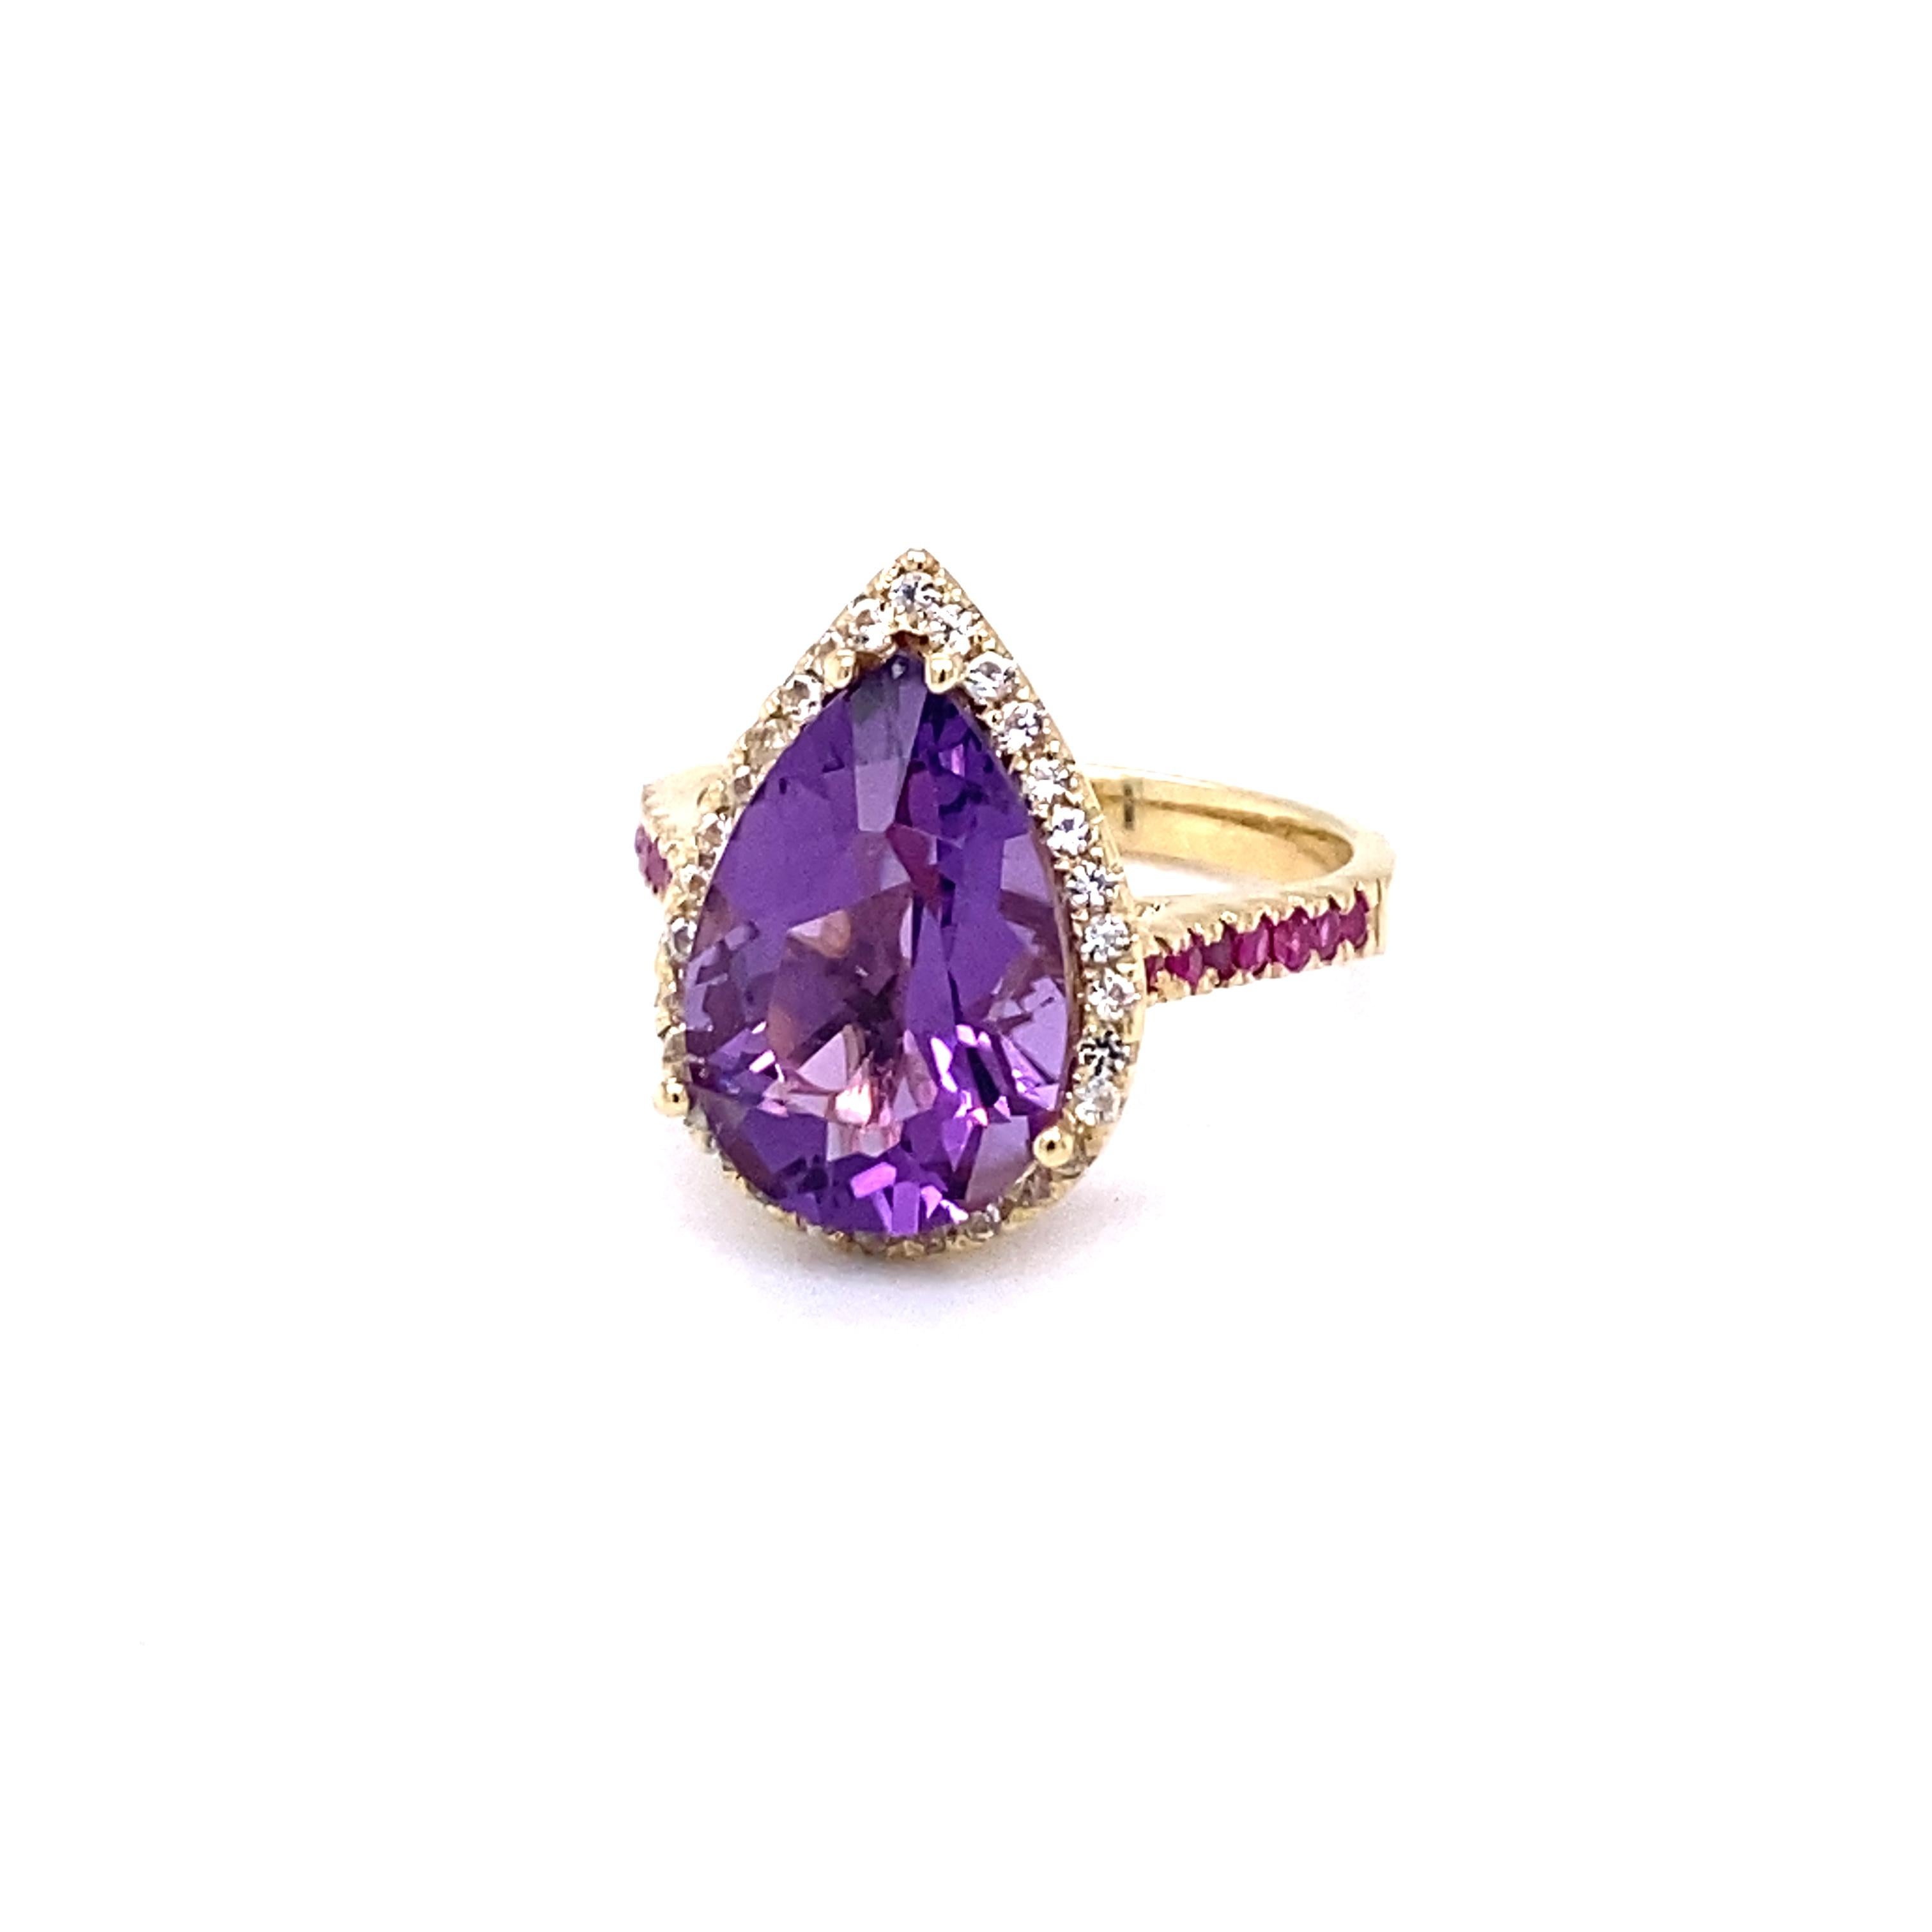 Contemporary 5.18 Carat Amethyst Pink Sapphire White Sapphire 14K Yellow Gold Cocktail Ring